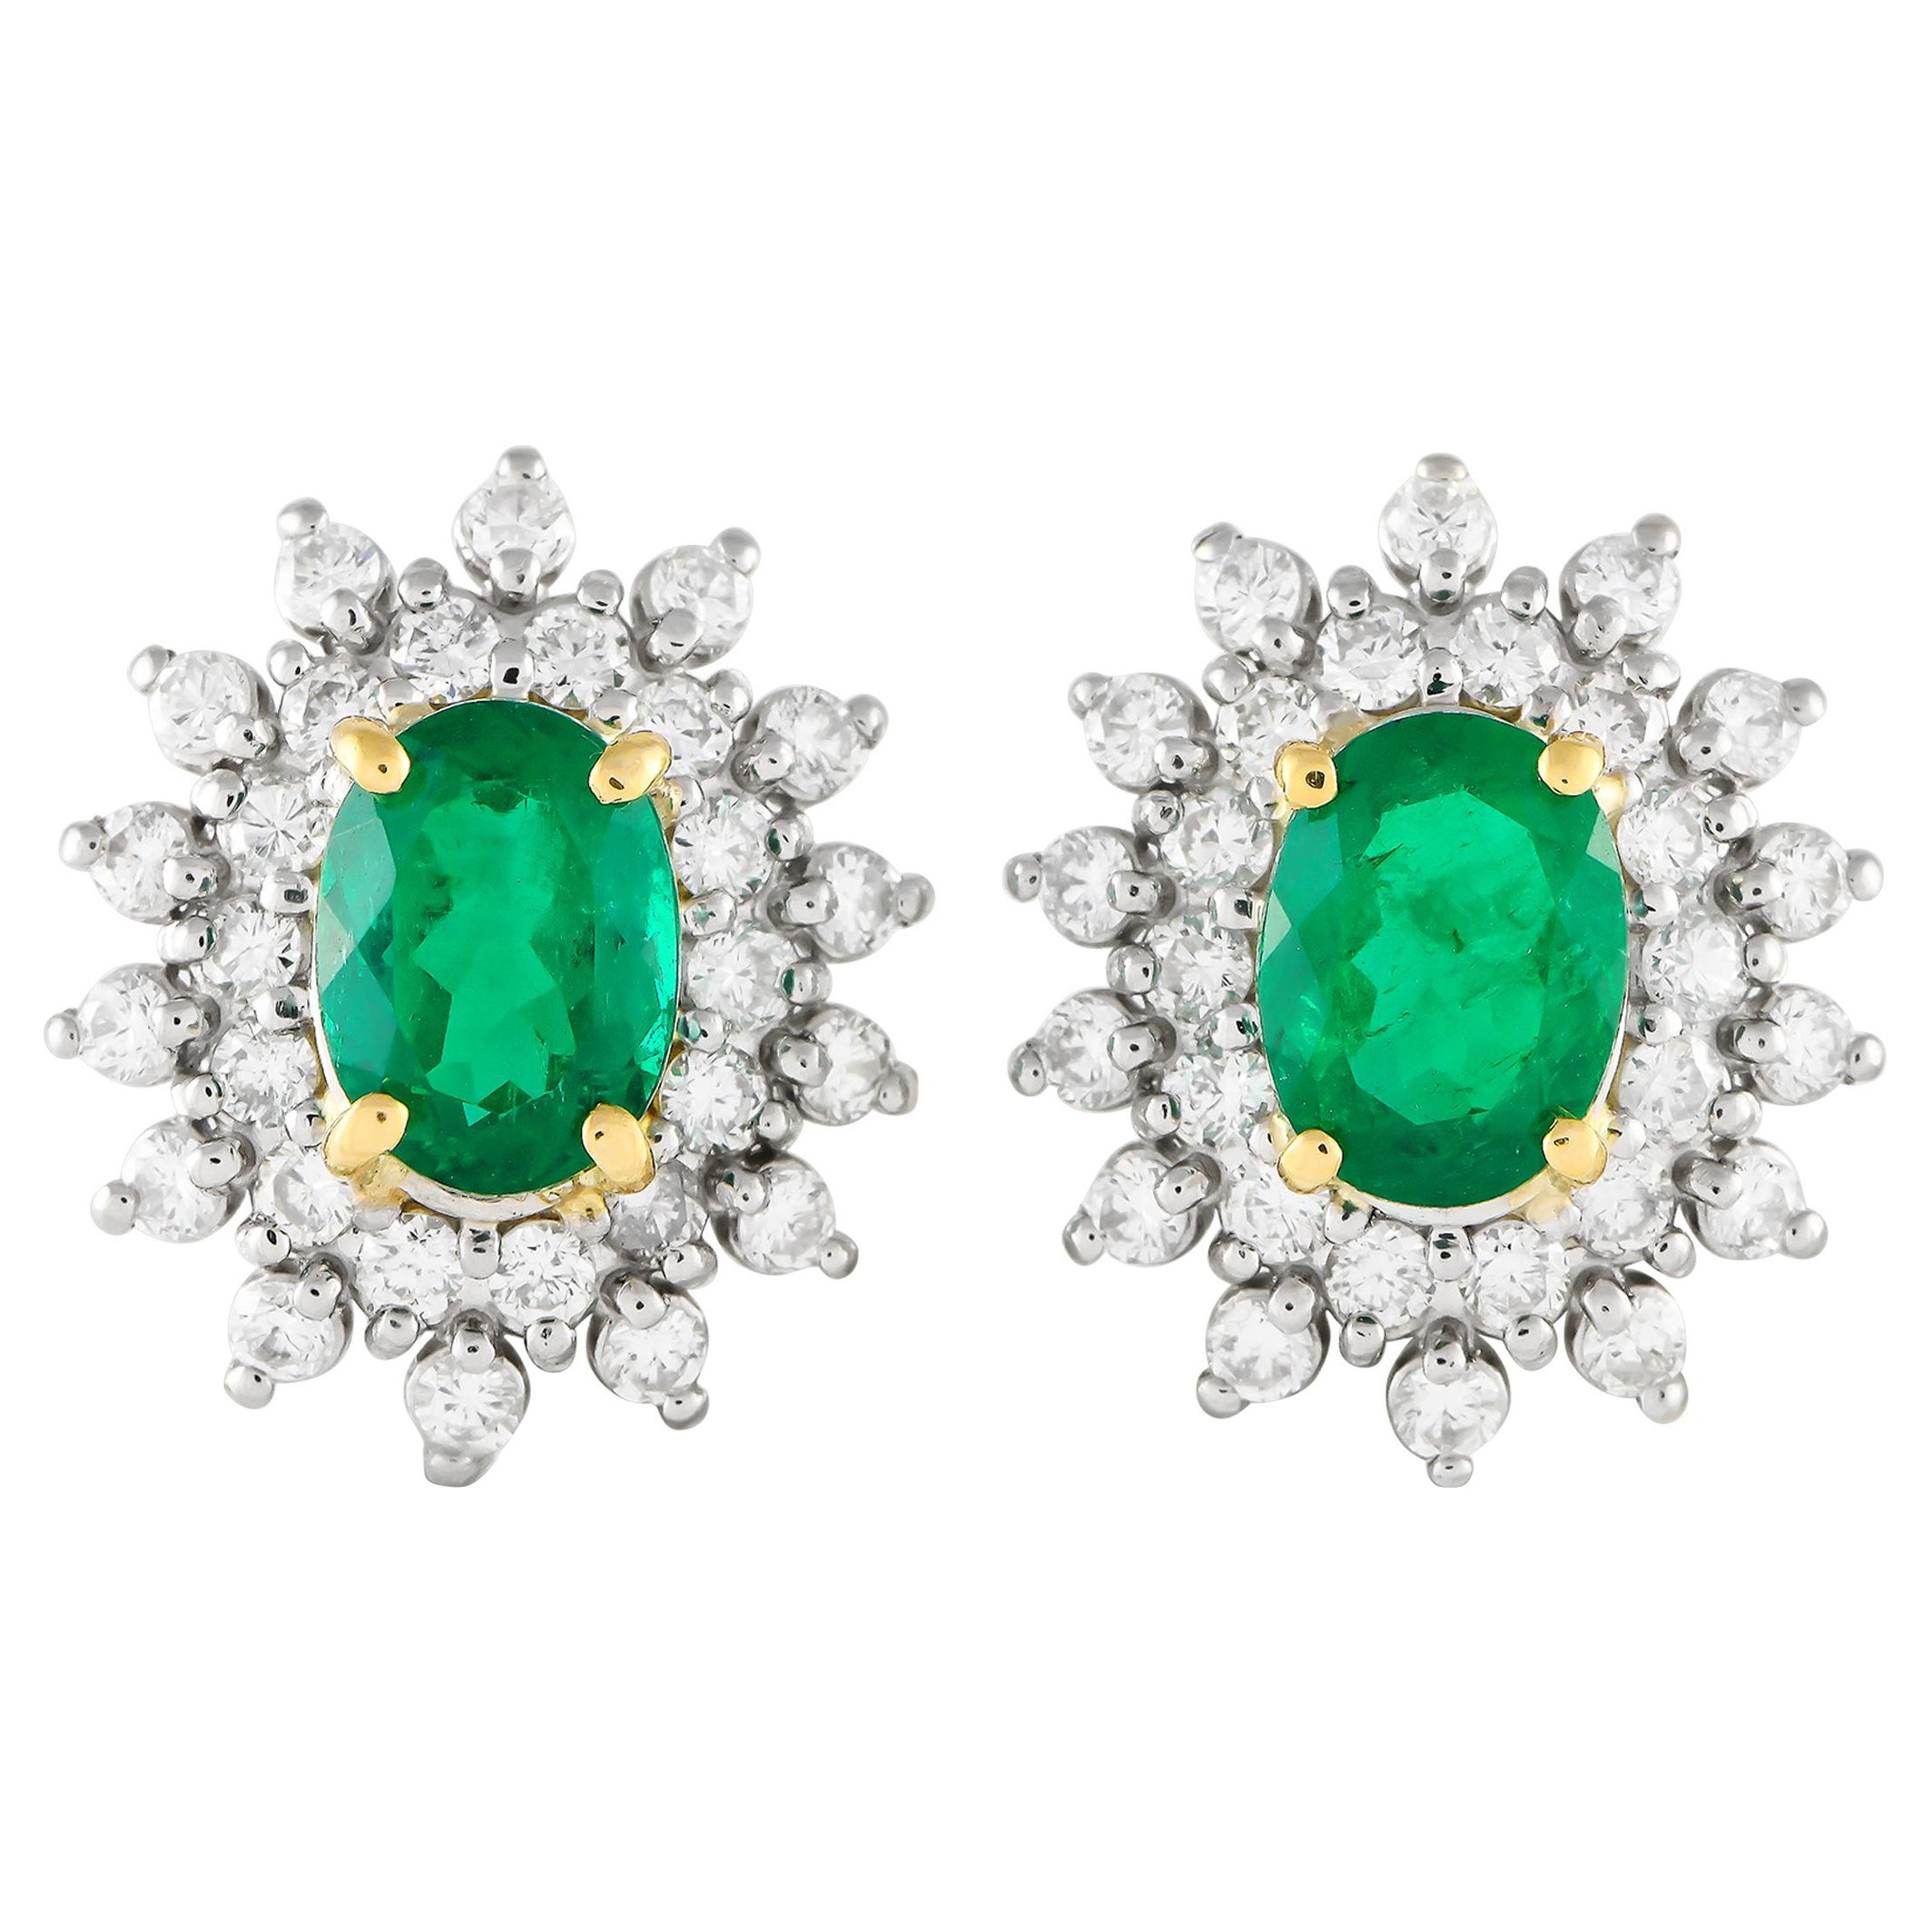 18K White and Yellow Gold 0.80ct Diamond and Emerald Halo Earrings 